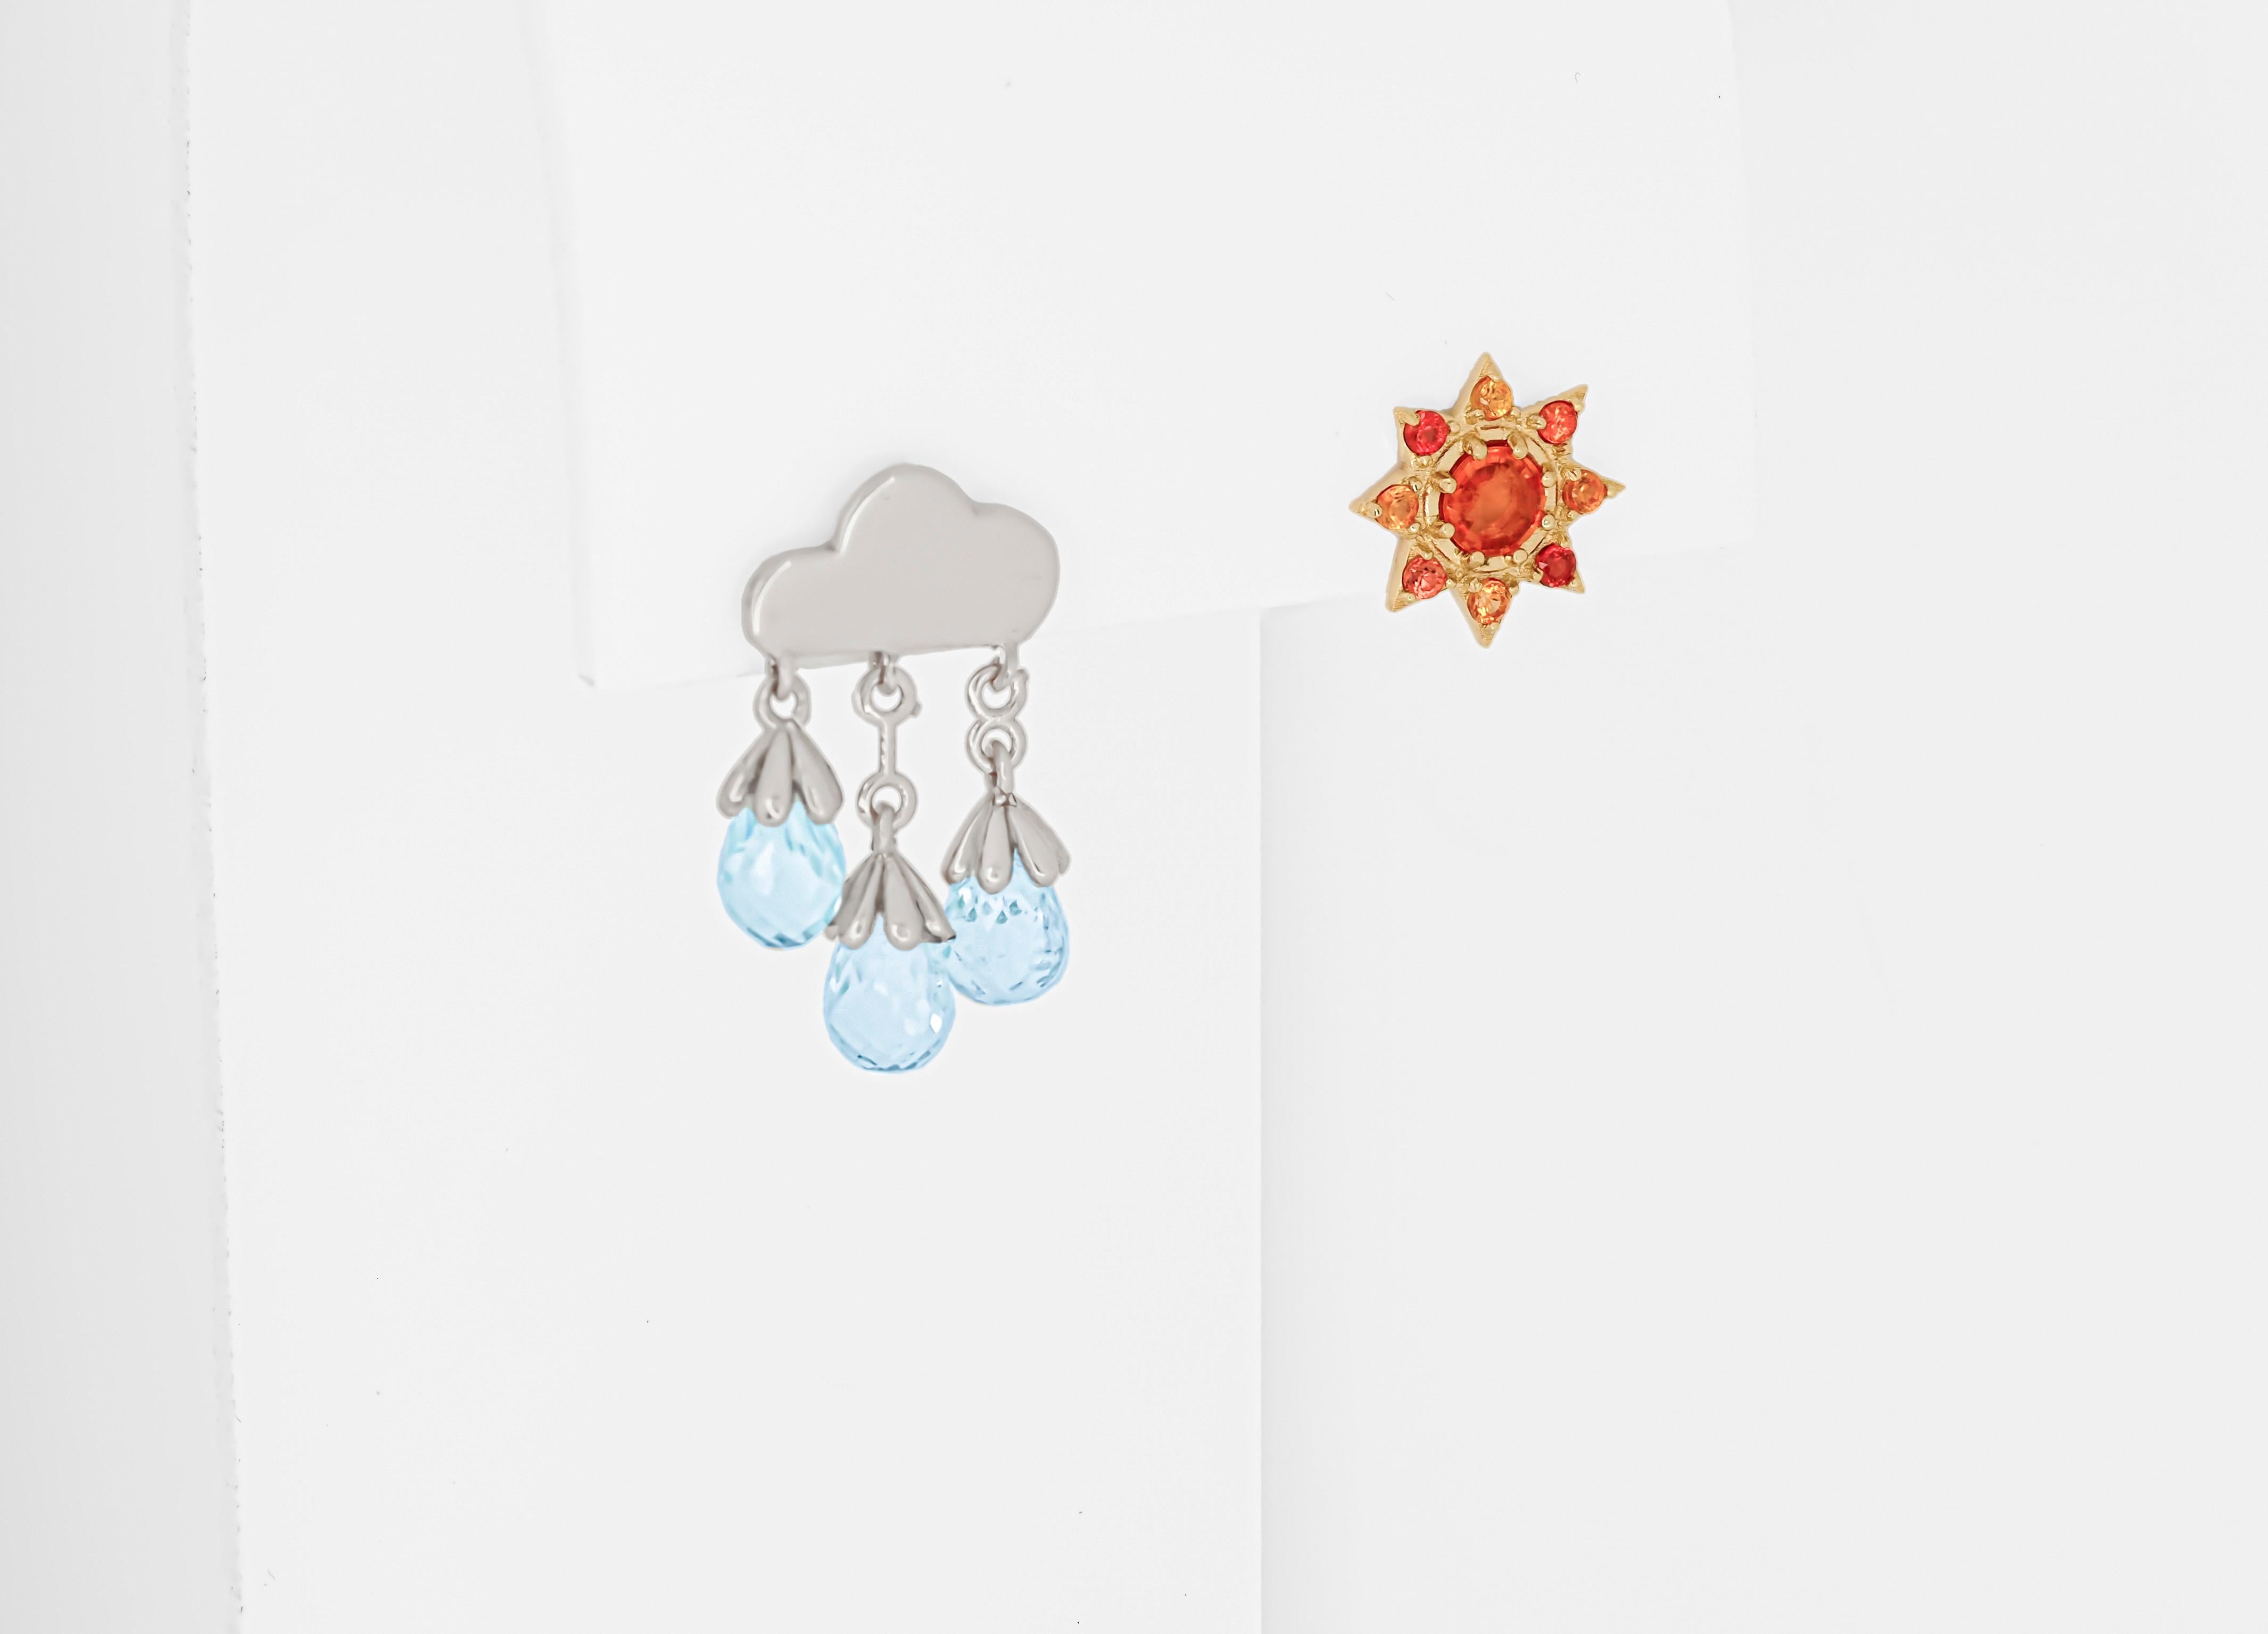 Sun and rain cloud 14 karat gold earrings studs. Orange sapphire studs. Mismatched Sun and Rain Cloud  Earrings.  Contemporary design earrings.

14 kt solid yellow and white gold. September birthstone. November birthstone.
Weight: 3.10 g. 
1. Rain